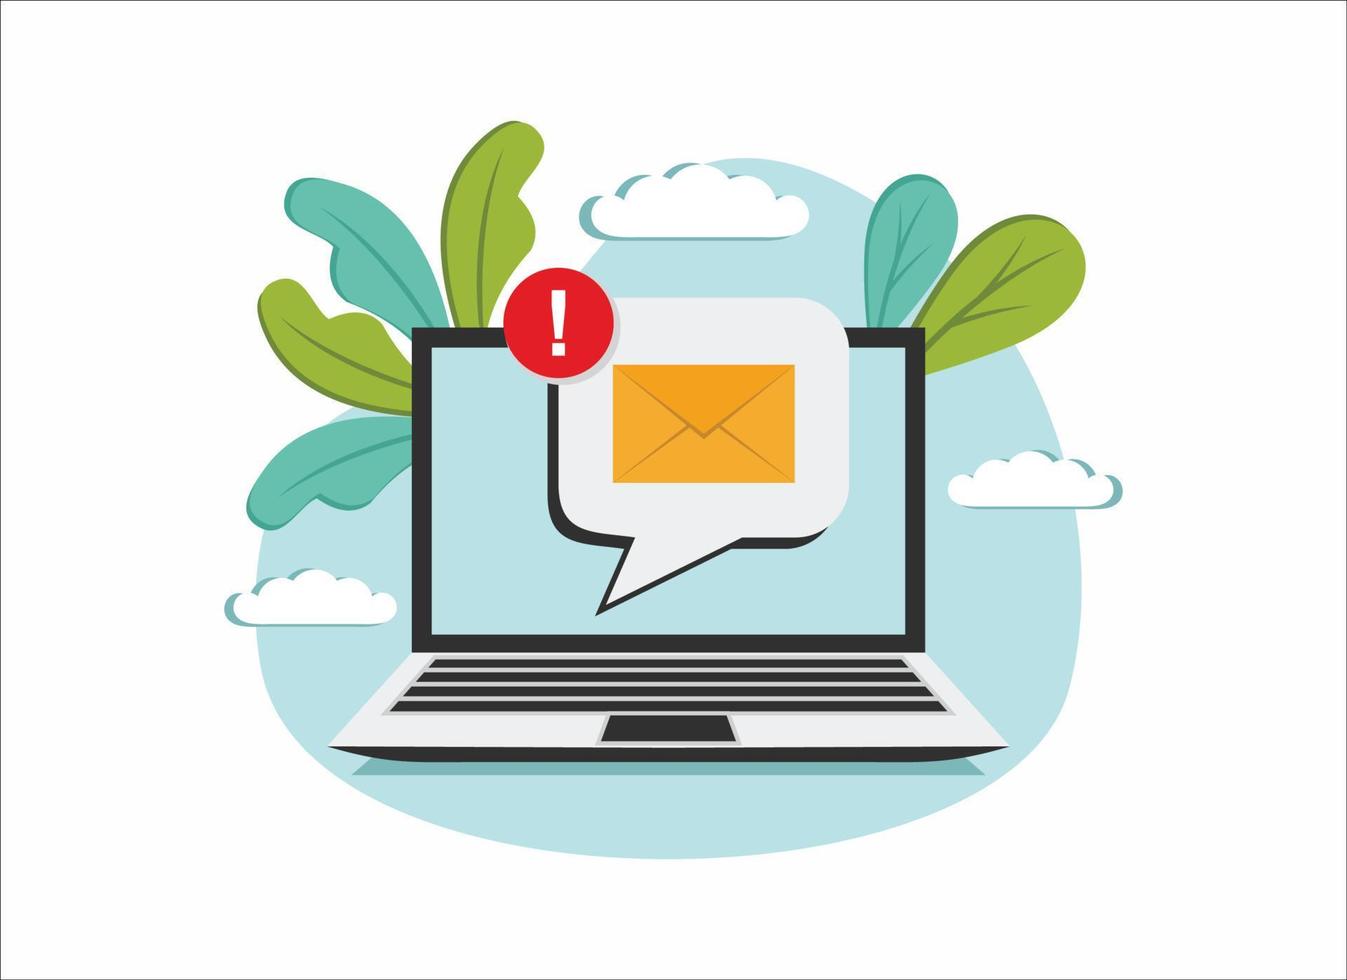 email problem notification on laptop computer display screen concept, flat vector illustration